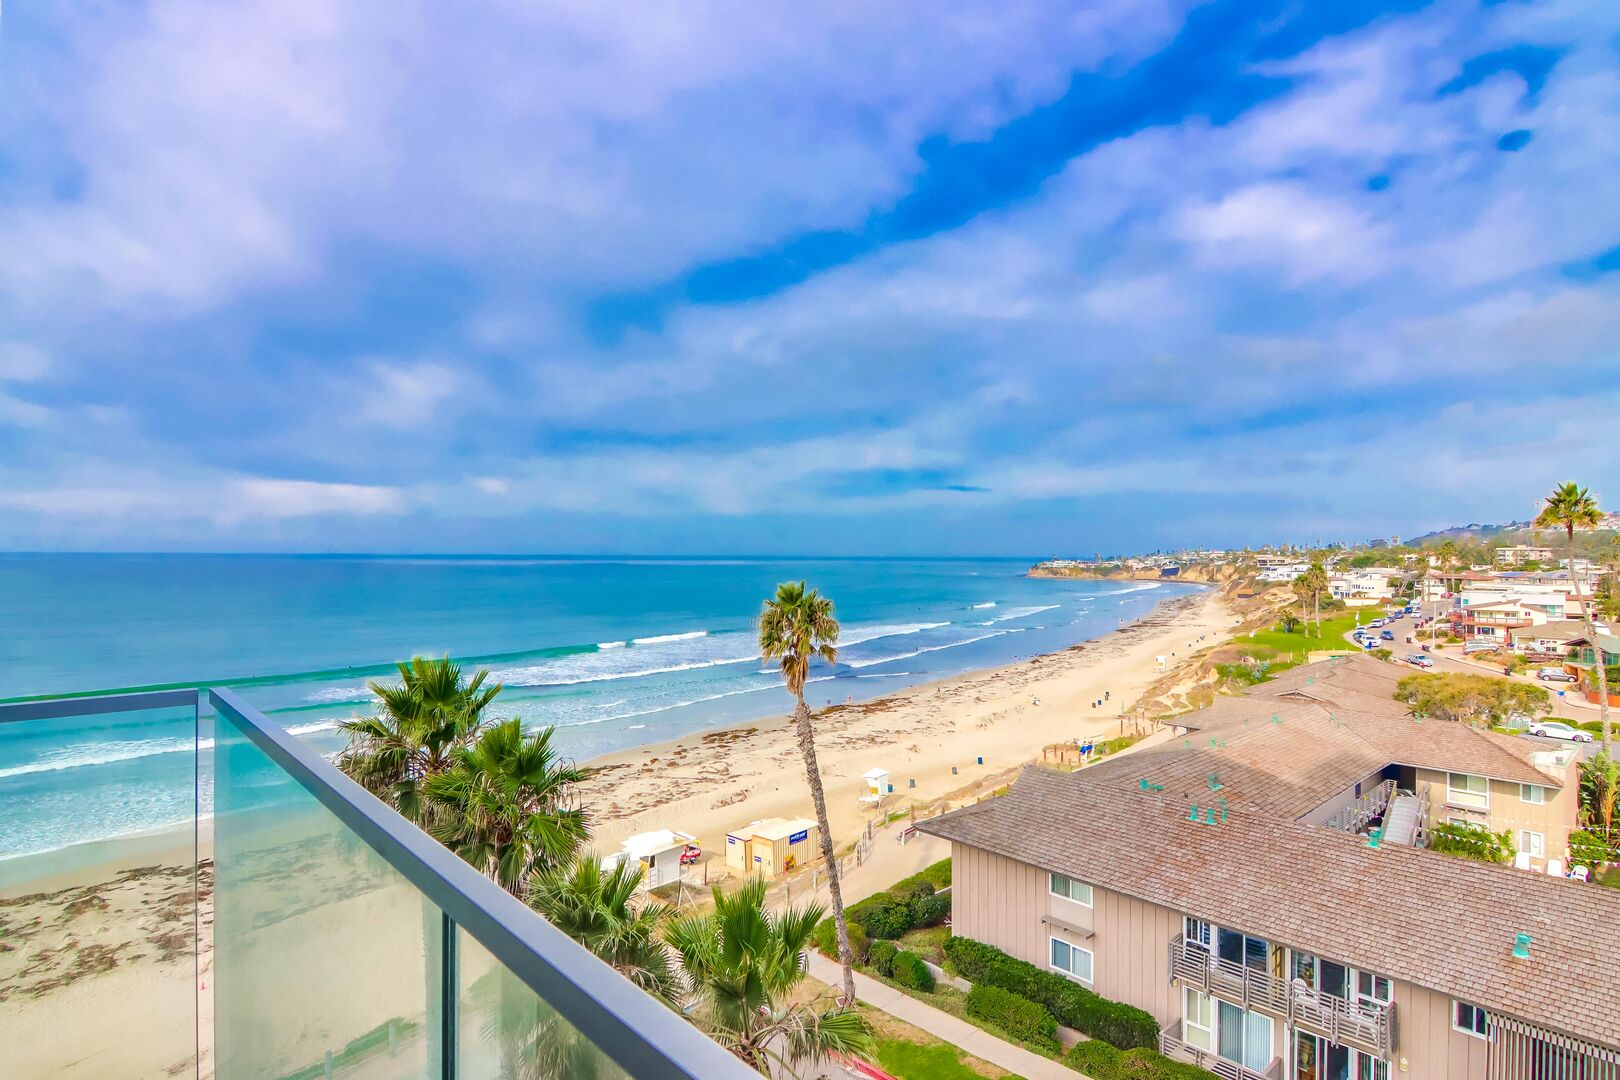 Views of North Pacific Beach from the side balcony